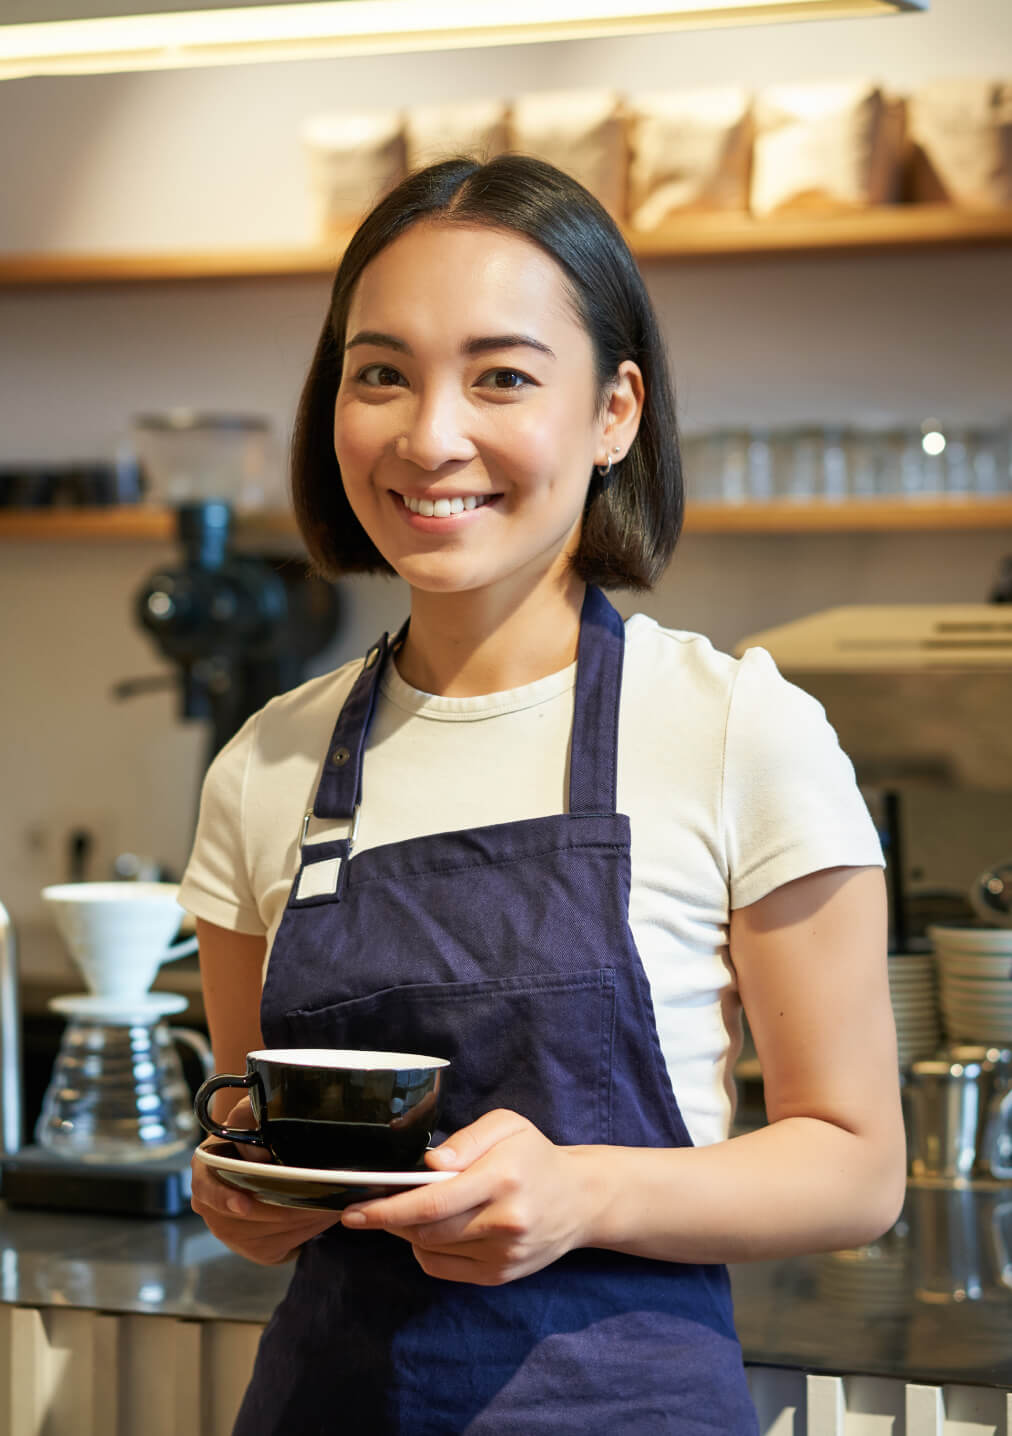 Young woman holding a coffee cup in a cafe wearing a white tshirt and an apron